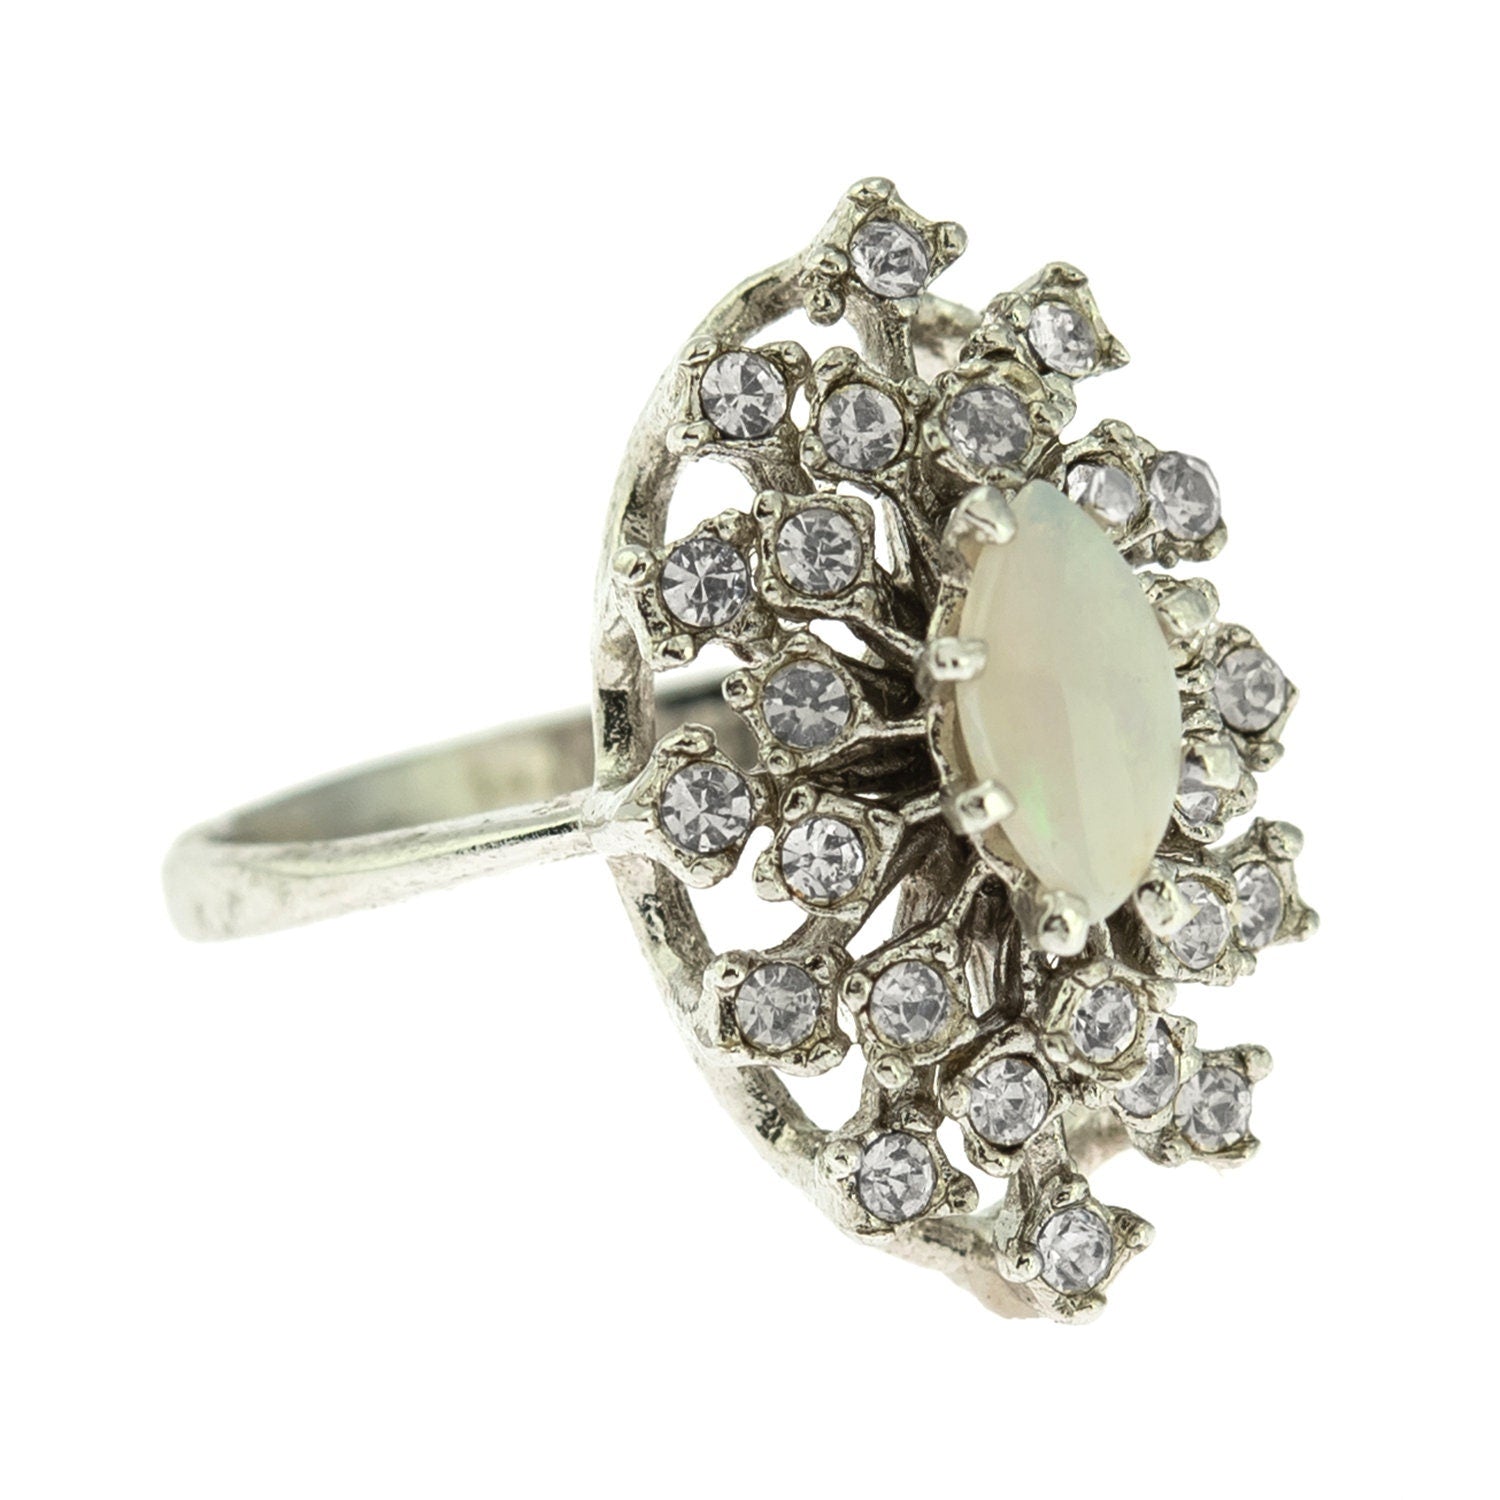 Vintage Ring Genuine Opal and Clear Swarovski Crystals 18k White Gold Silver Victorian Style #R221 - Limited Stock - Never Worn